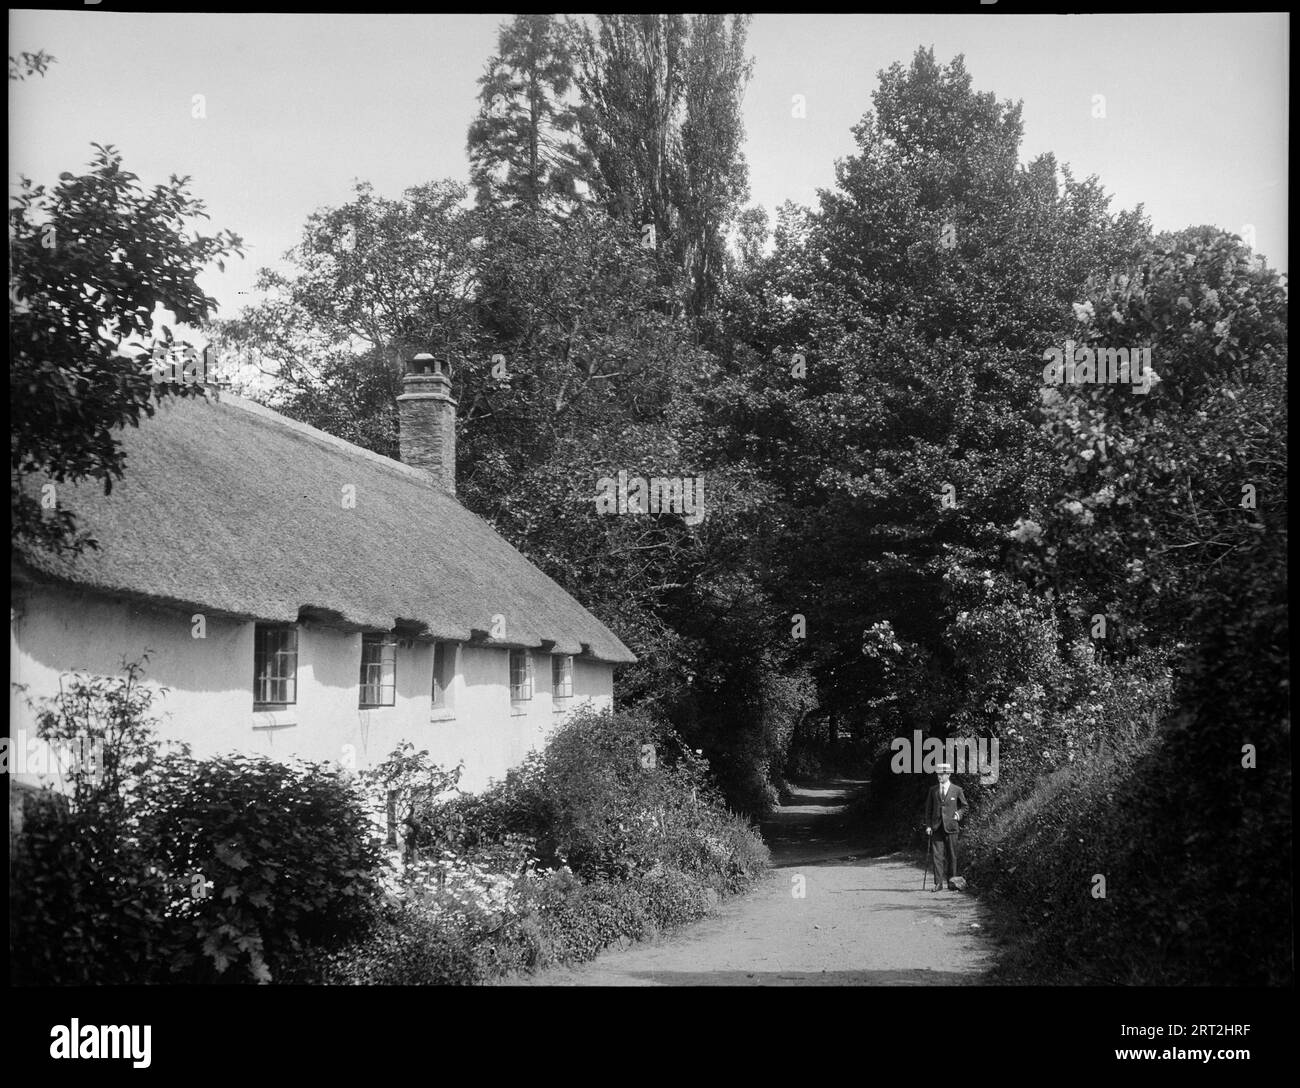 Dunster, West Somerset, Somerset, 1940-1953. View of a lane in Dunster with a low thatched cottage on the left and a man stood on the right side of the road.View of a lane in Dunster with a low cottage on the left side of the road. It has a thatched roof and five upper storey windows visible. The lower section of the house is obscured by foliage. On the right side of the road, opposite the cottage, is a man stood looking at the house, with a walking cane in his right hand and his left hand in his coat pocket. The lane behind him has overhanging trees on both sides. Stock Photo